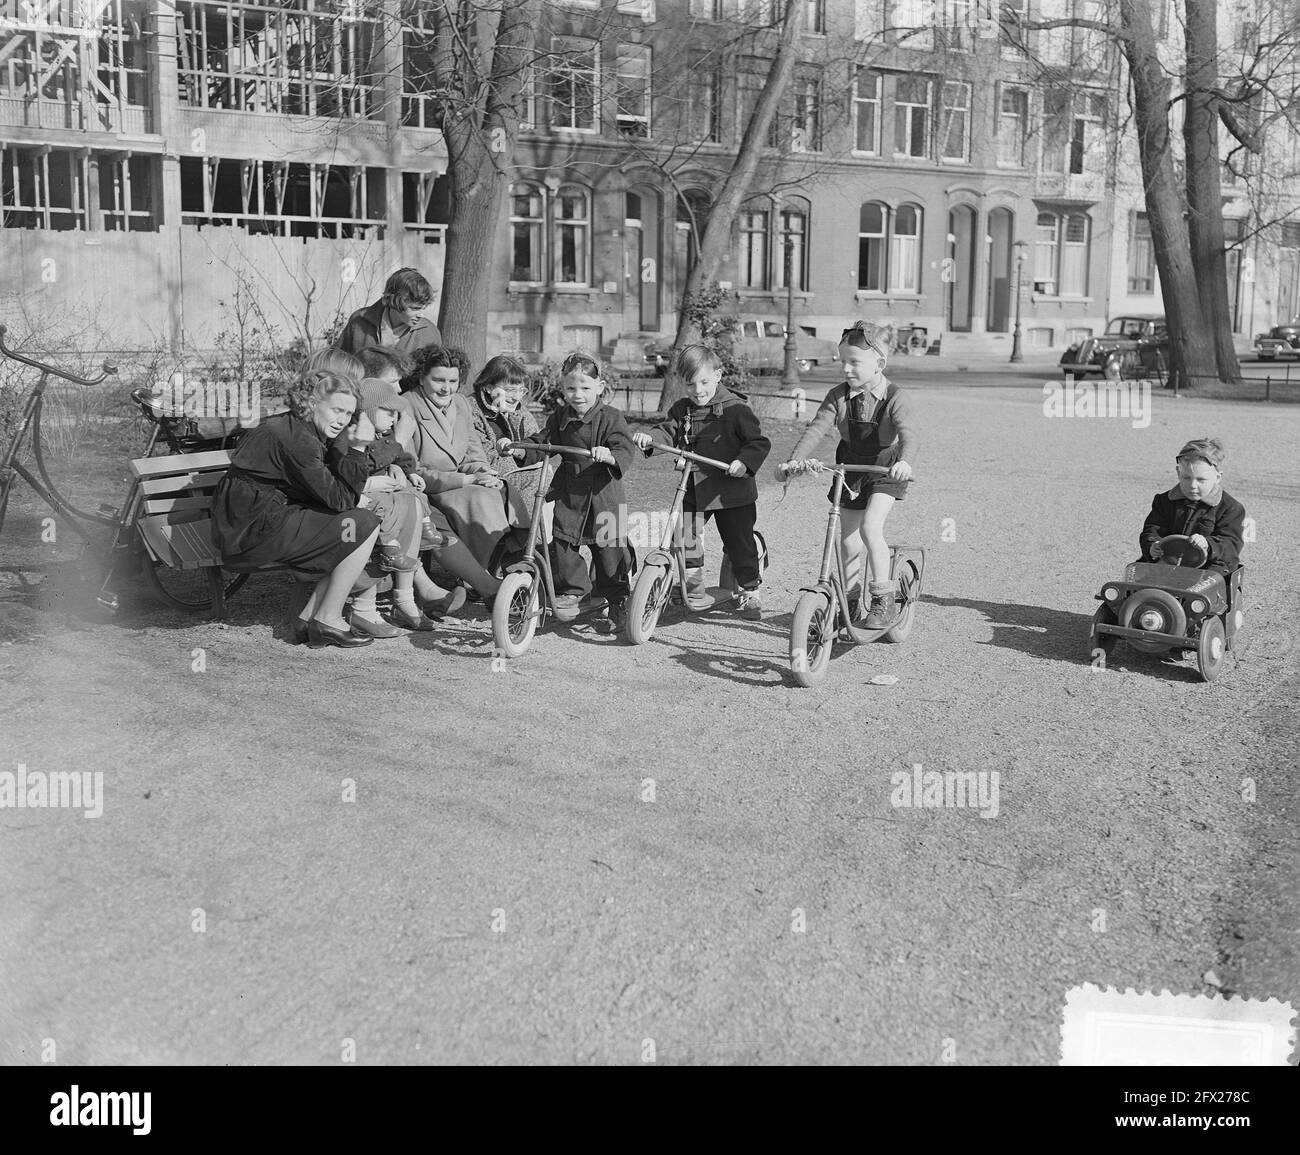 Spring weather in Amsterdam (Frederiksplein), April 8, 1954, The Netherlands, 20th century press agency photo, news to remember, documentary, historic photography 1945-1990, visual stories, human history of the Twentieth Century, capturing moments in time Stock Photo